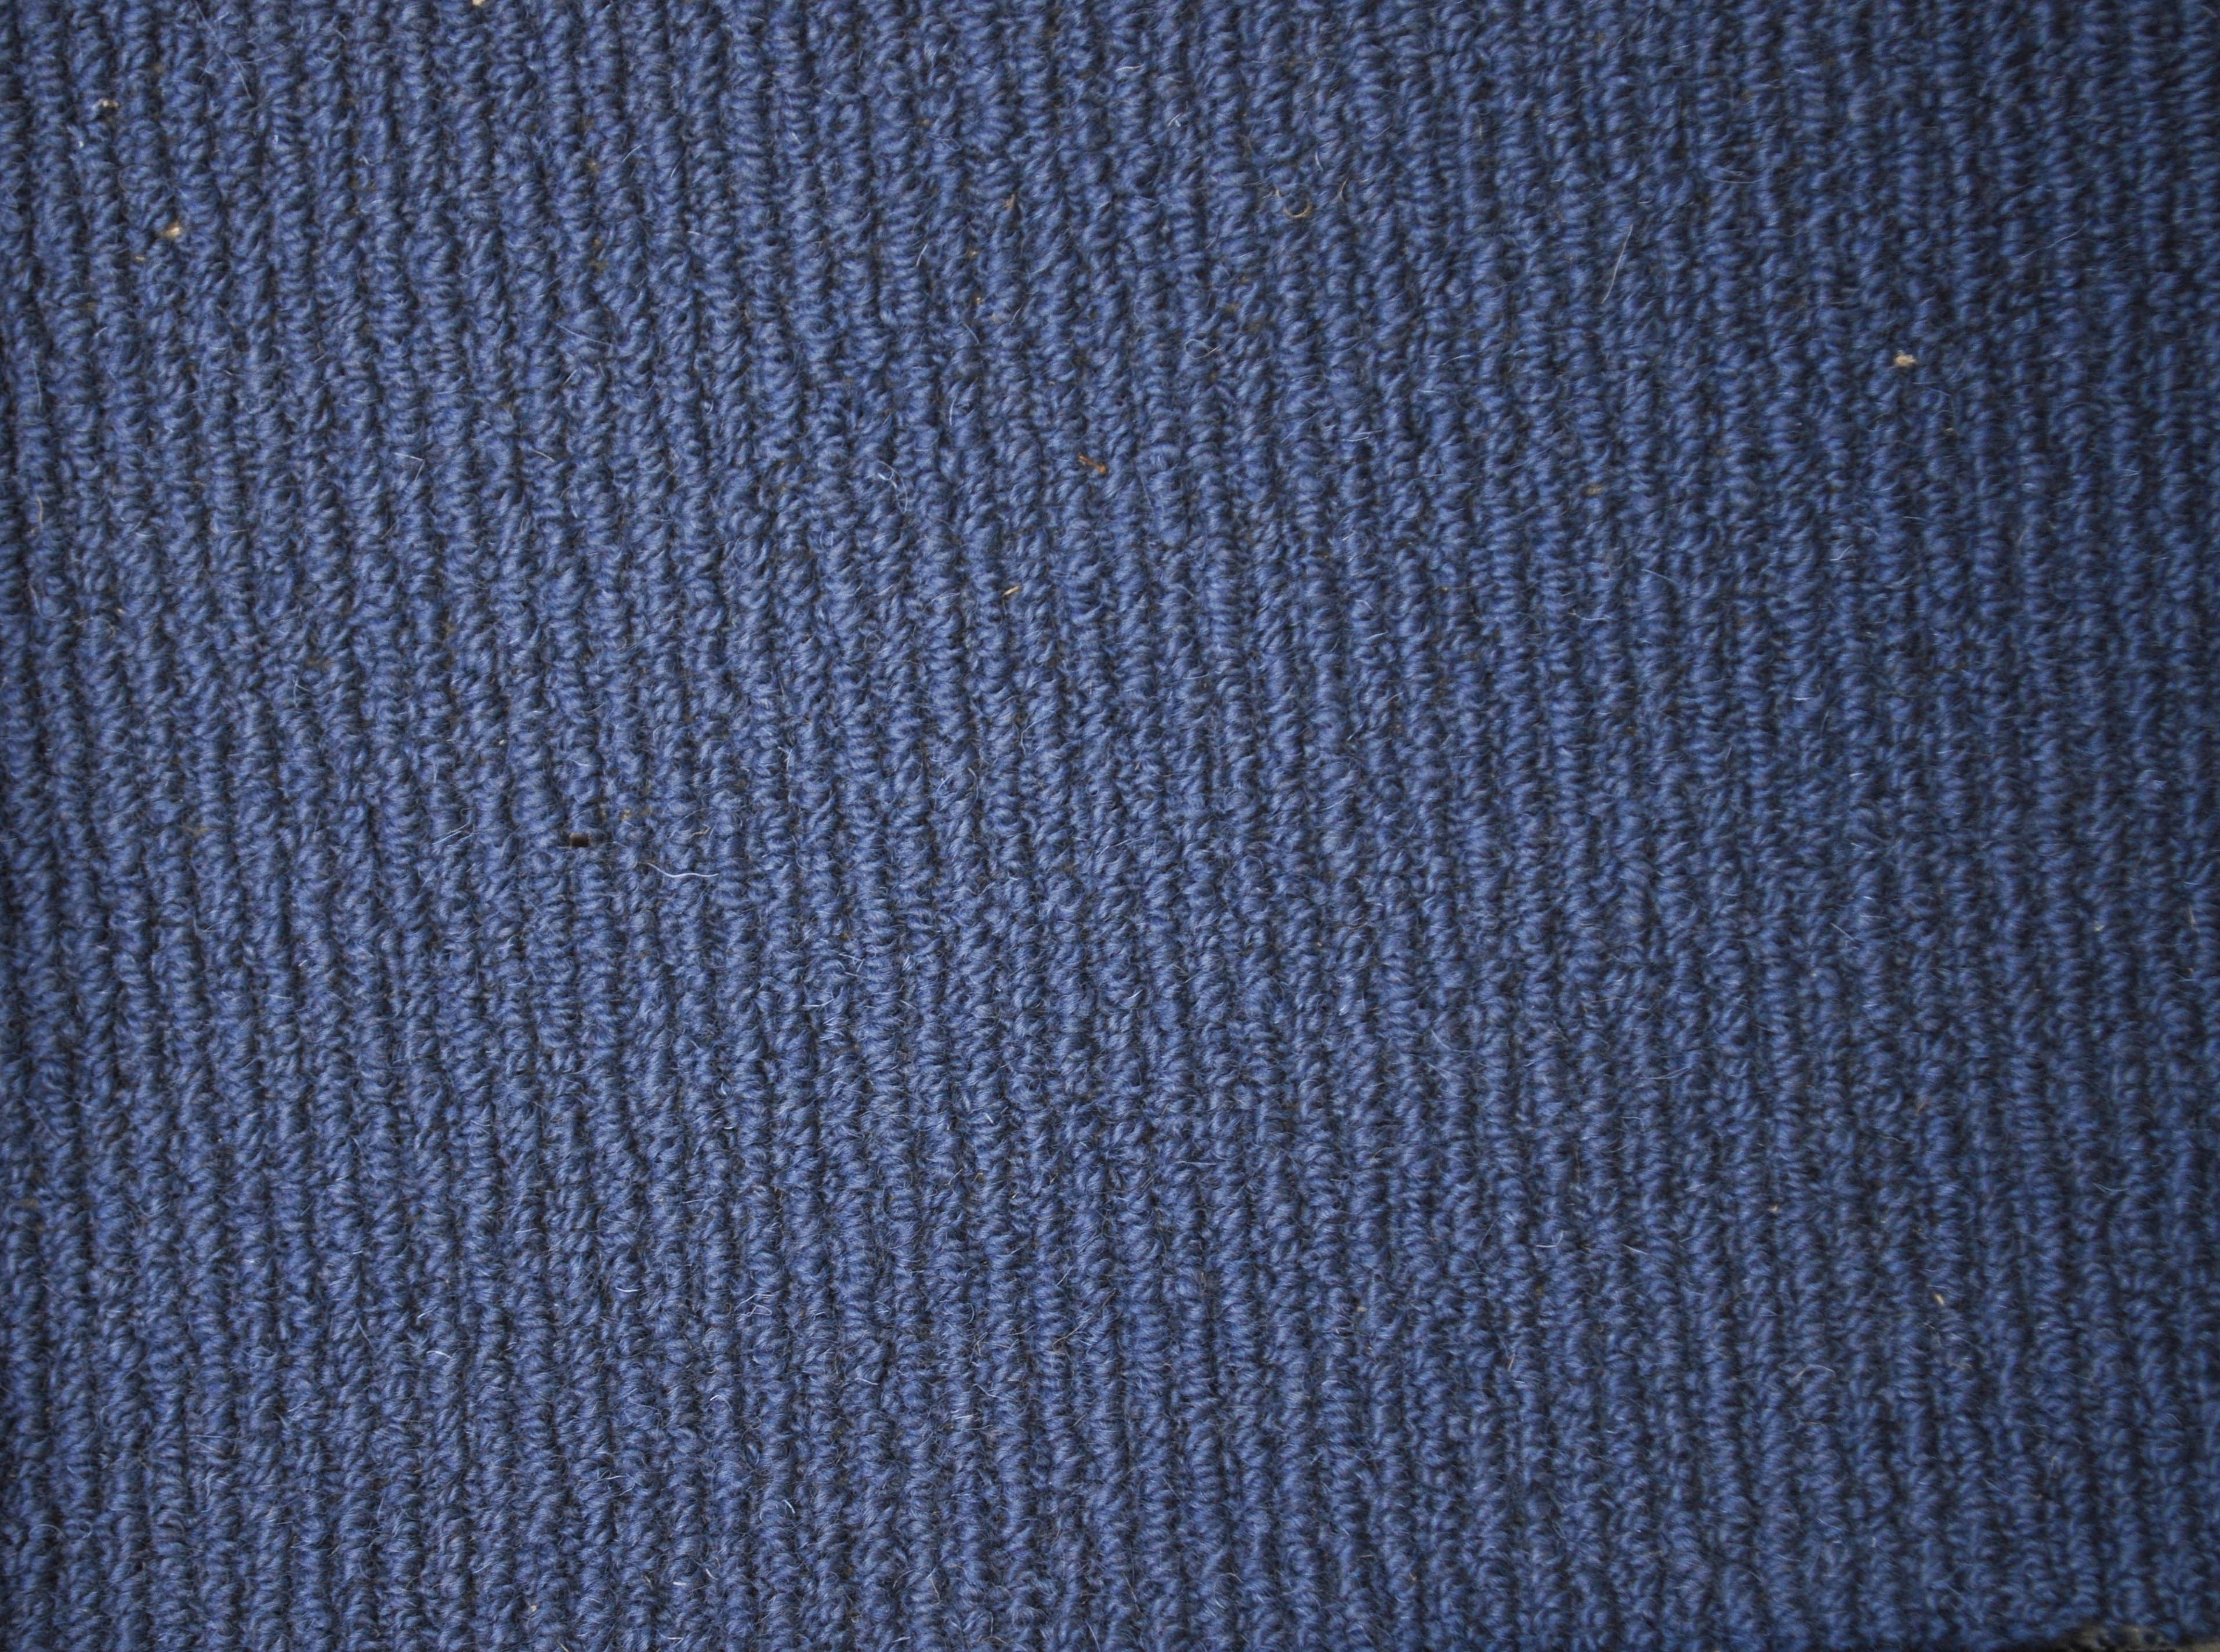 royal blue colored, 100% wool fibre, twist, sisal pile carpet called mountain peaks on sale at Concord Floors.